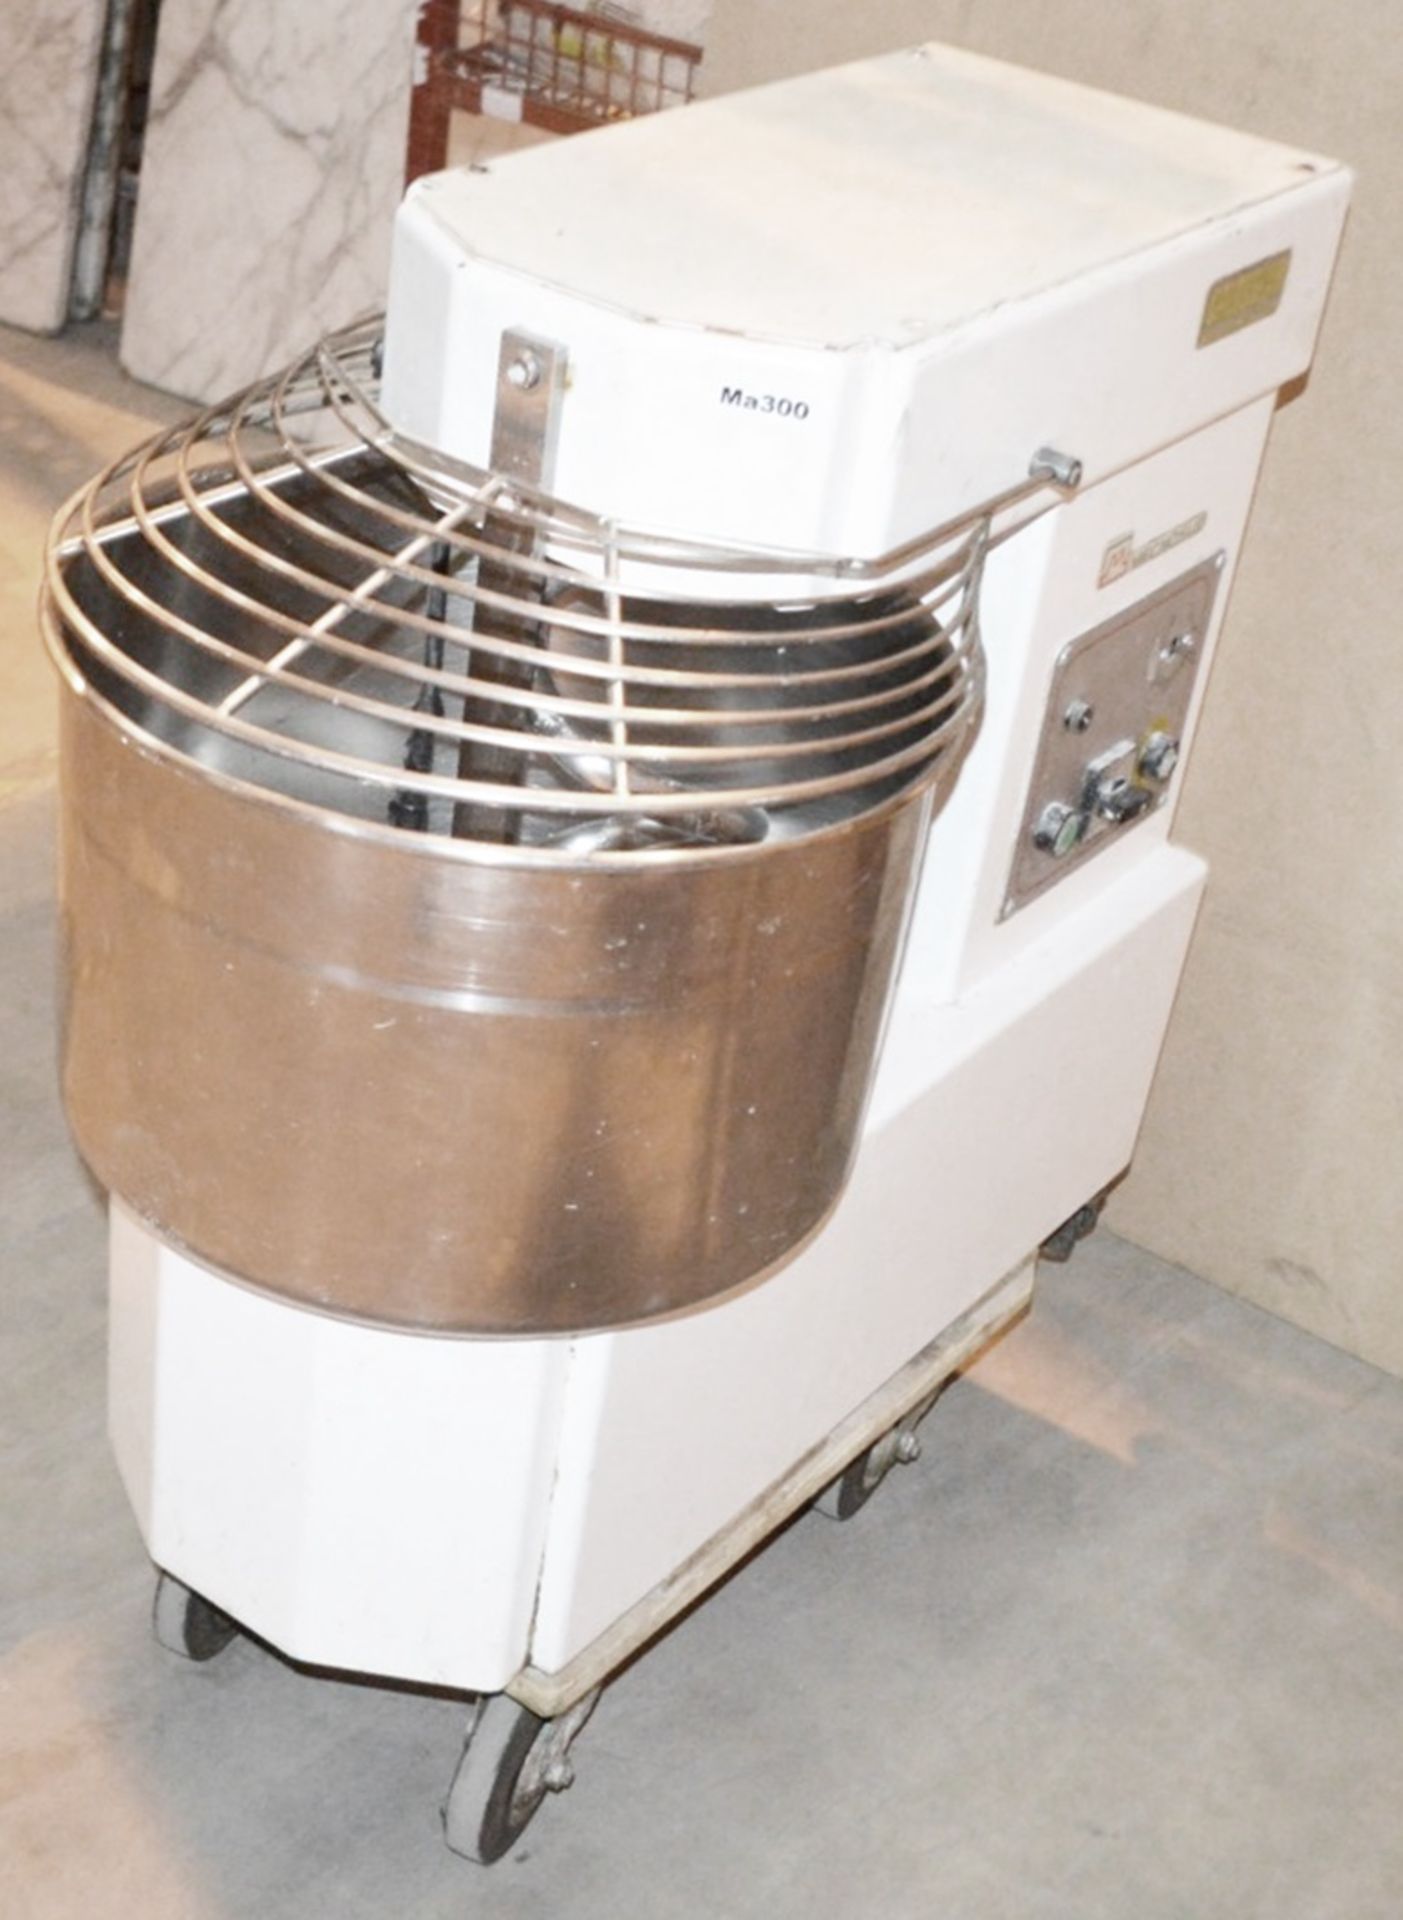 1 x Mecnosud IM25M Commercial Spiral Dough Mixer With Bowl - Dimensions: D80 x H65 x W40cm - Image 2 of 5